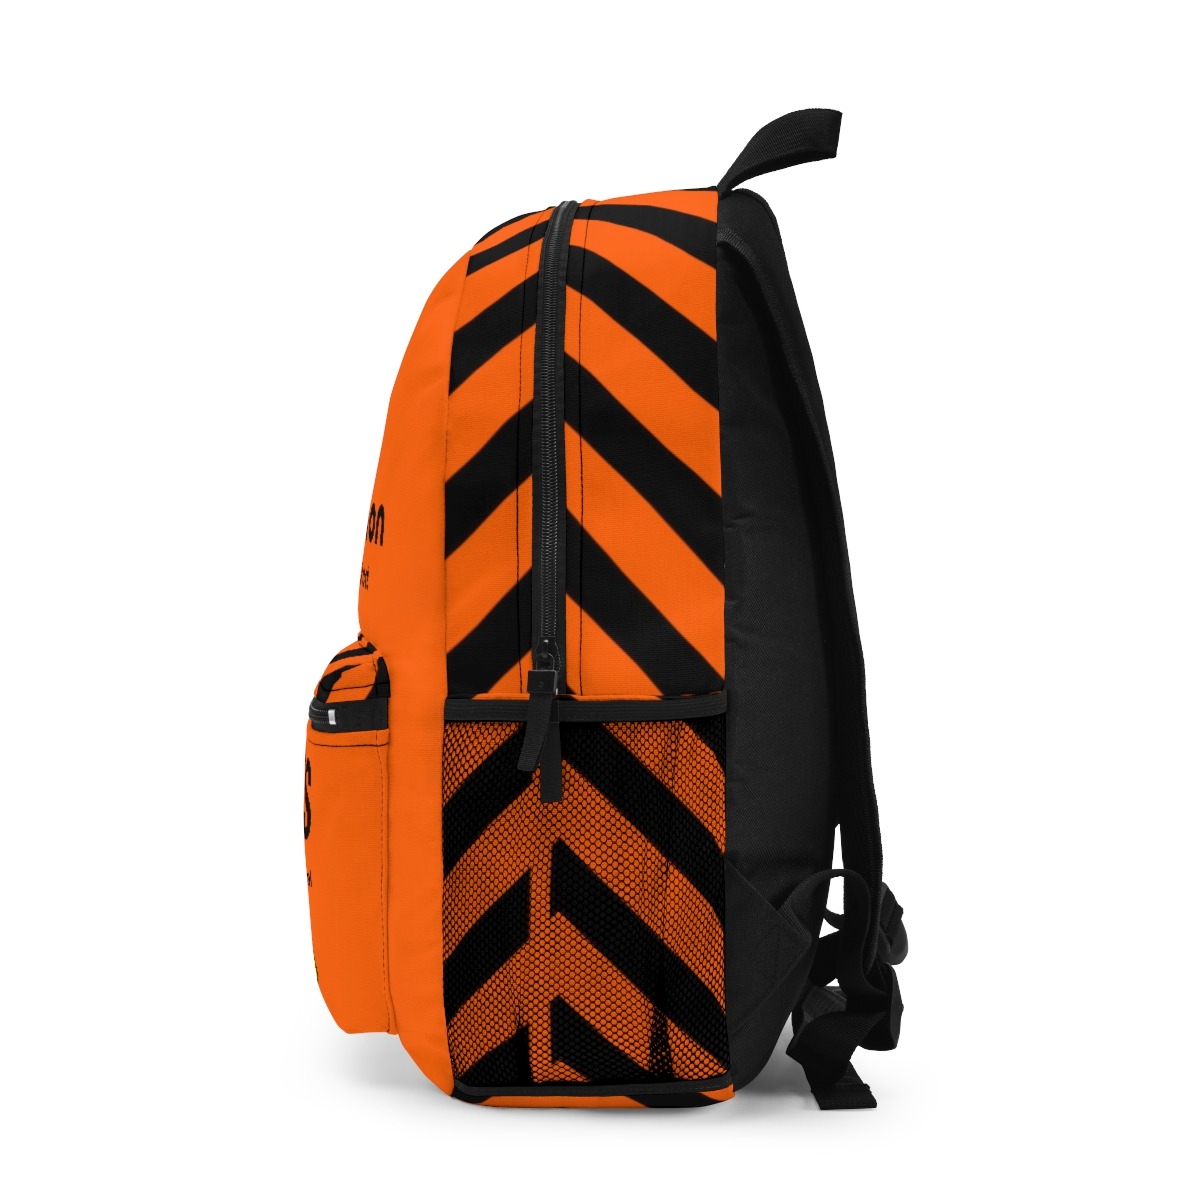 Buy SCP Foundation D-Class Backpack ⋆ NEXTSHIRT